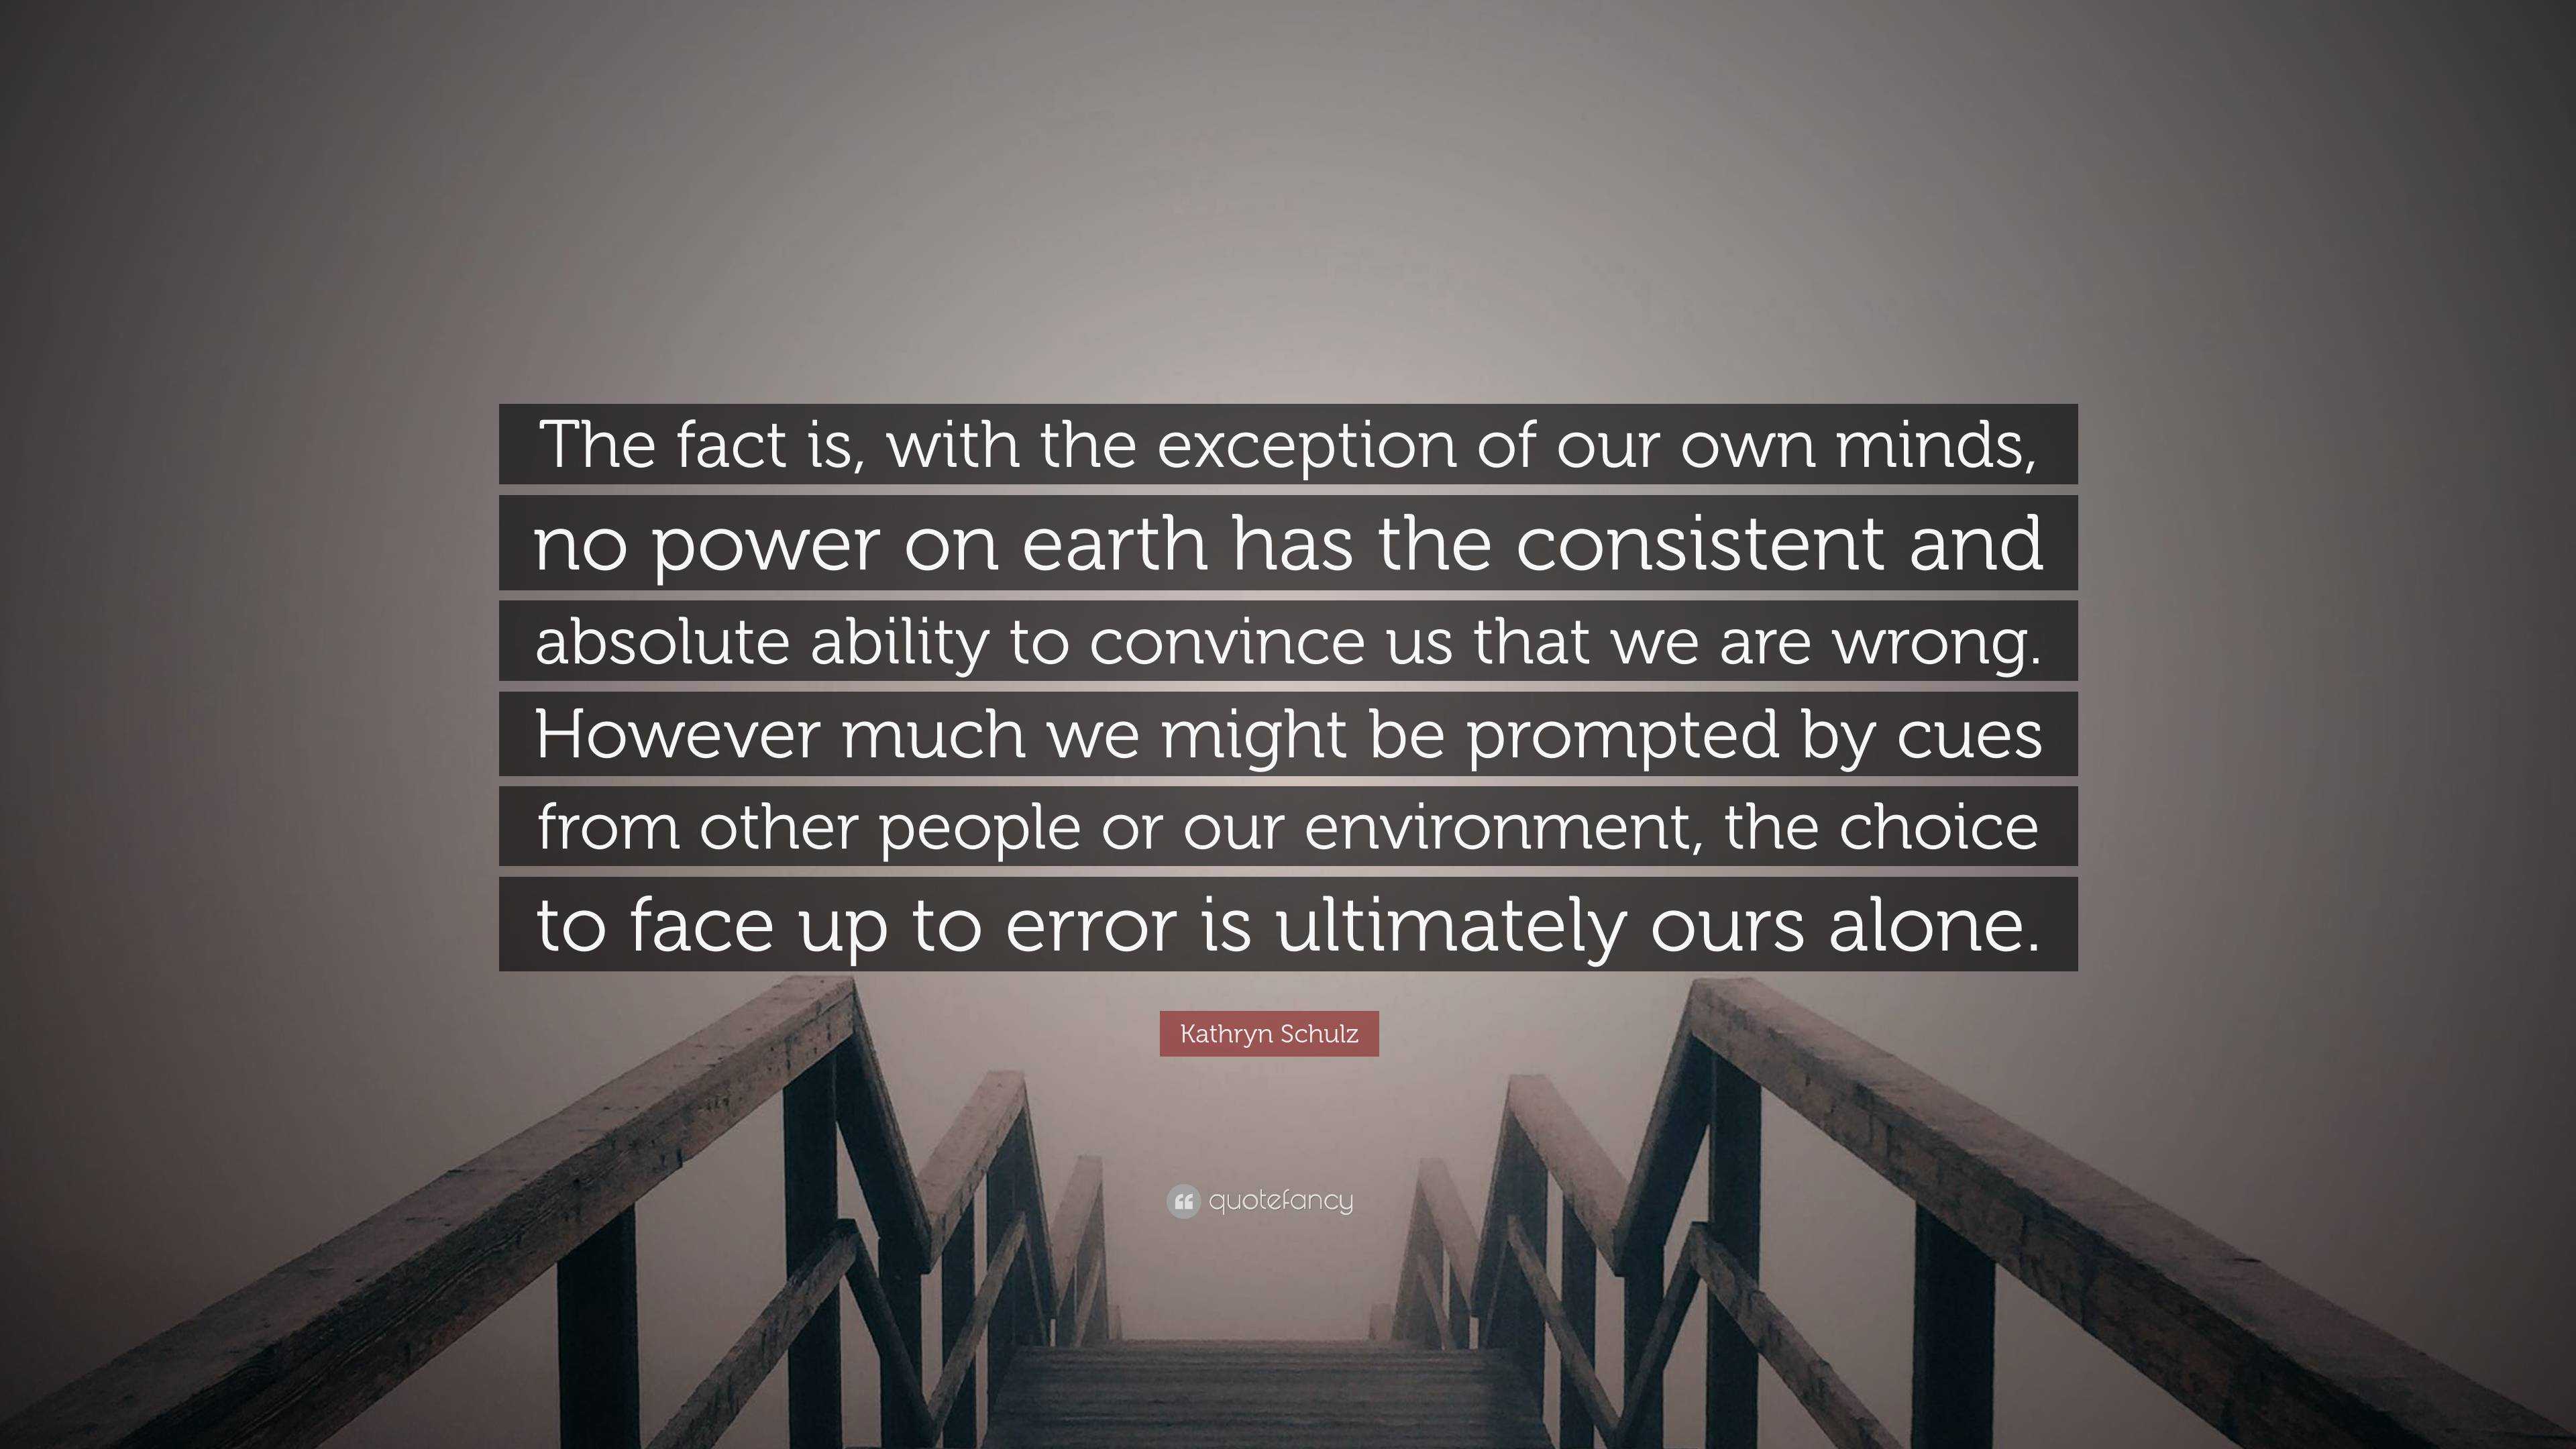 Kathryn Schulz Quote: “The fact is, with the exception of our own minds ...